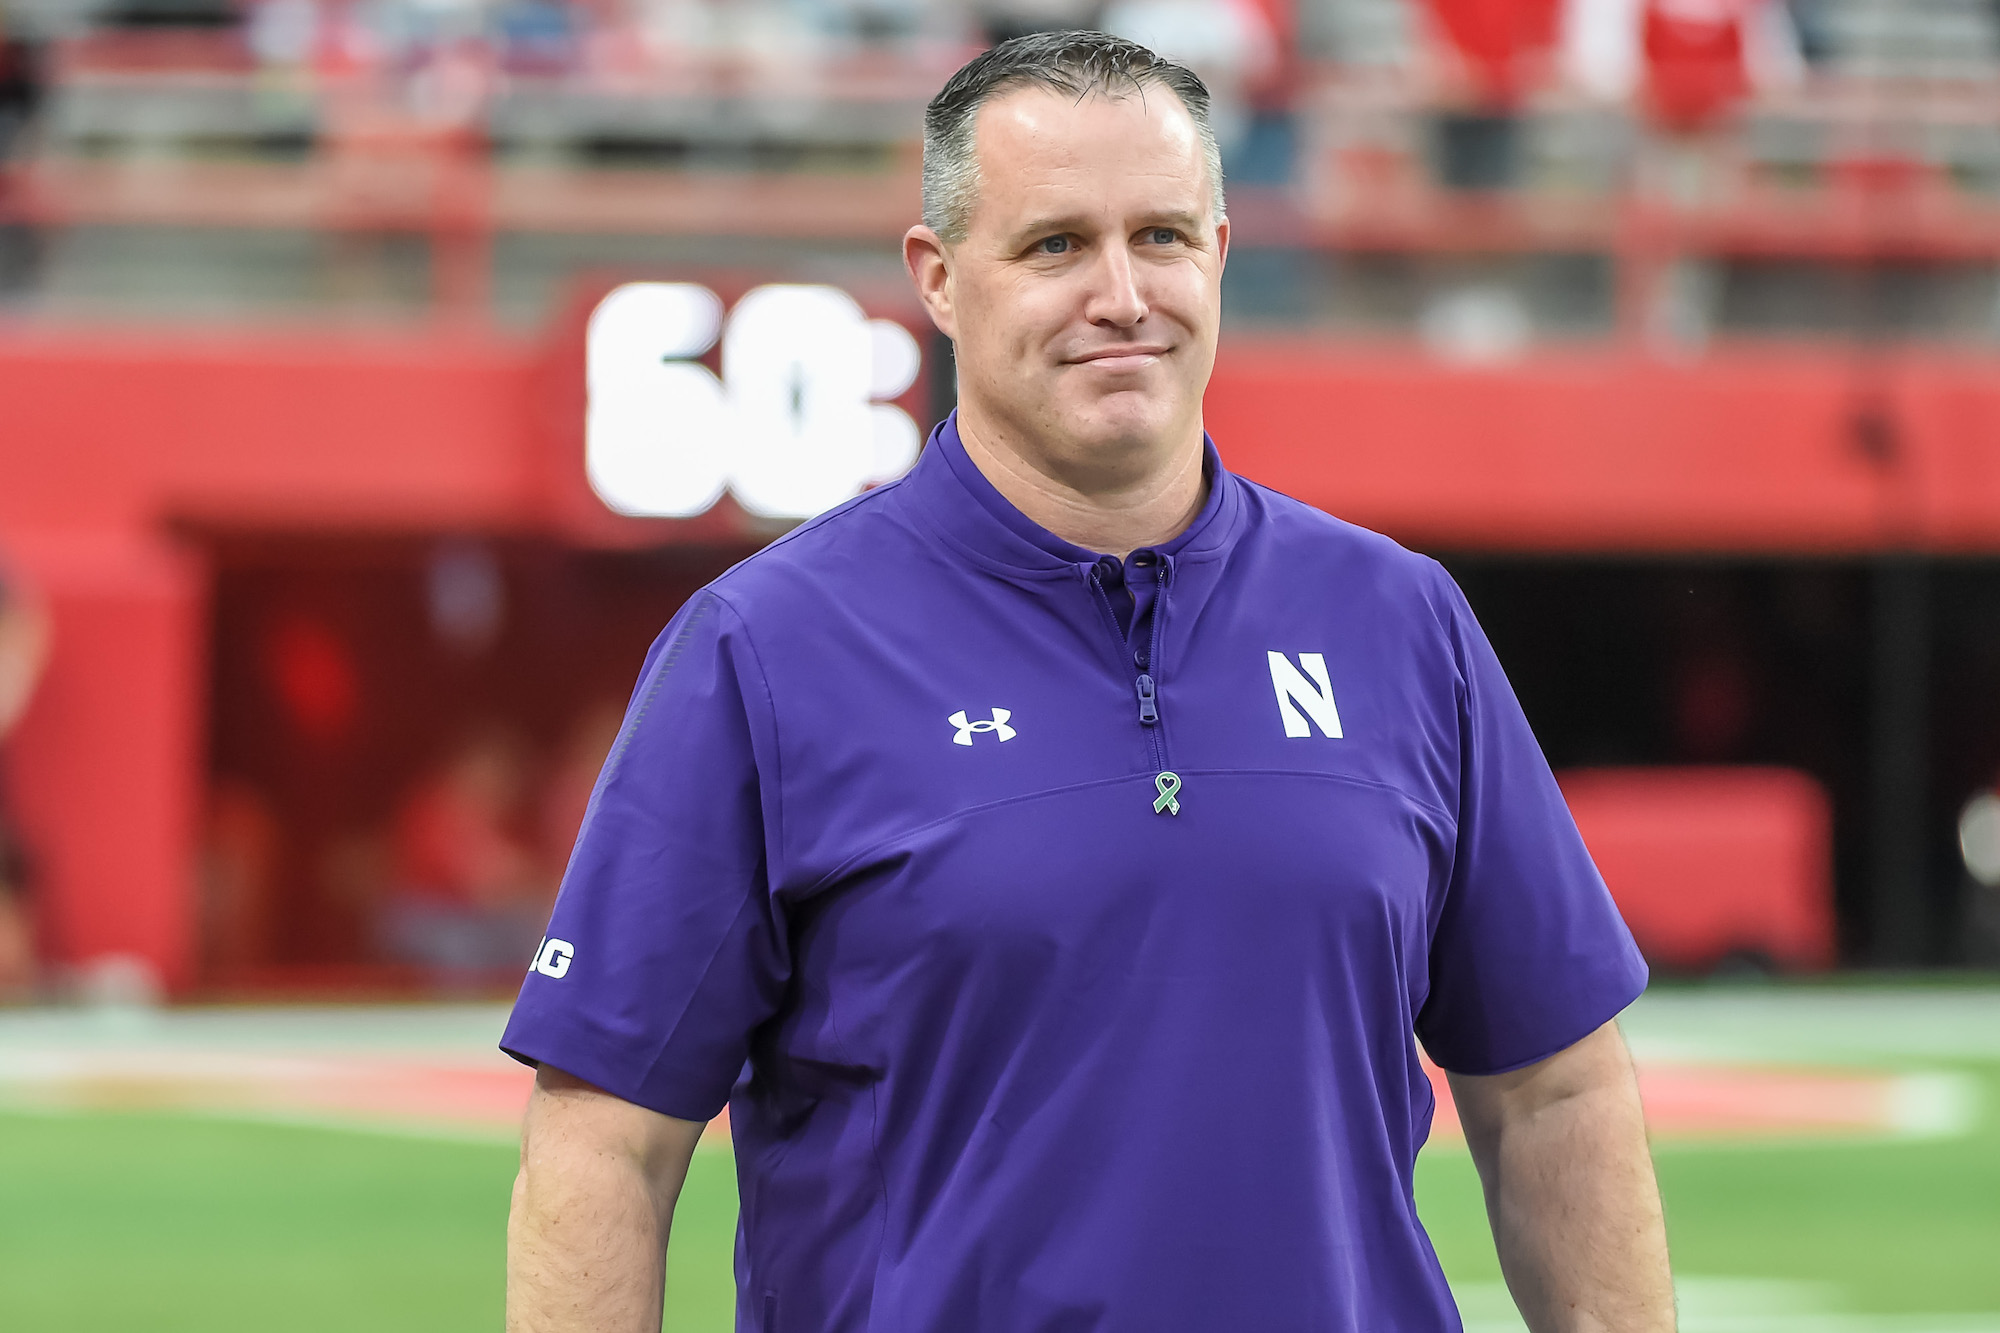 LINCOLN, NE - OCTOBER 2: Head coach Pat Fitzgerald of the Northwestern Wildcats watches the team warm up before the game against the Nebraska Cornhuskers at Memorial Stadium on October 2, 2021 in Lincoln, Nebraska. (Photo by Steven Branscombe/Getty Images)